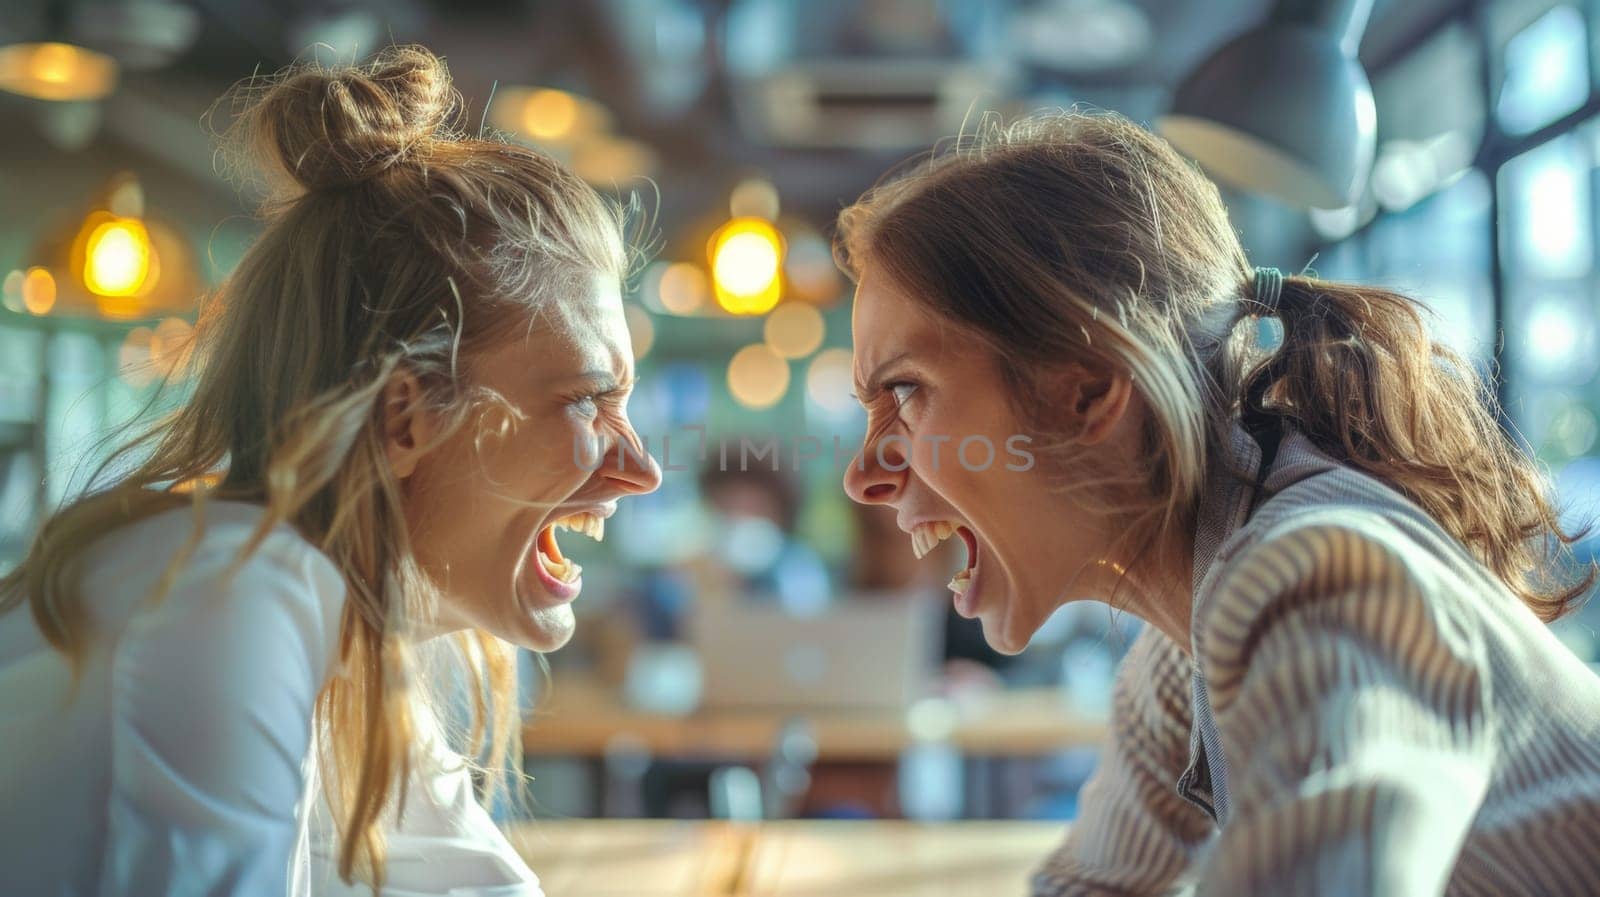 Two women laughing at each other in a restaurant, AI by starush